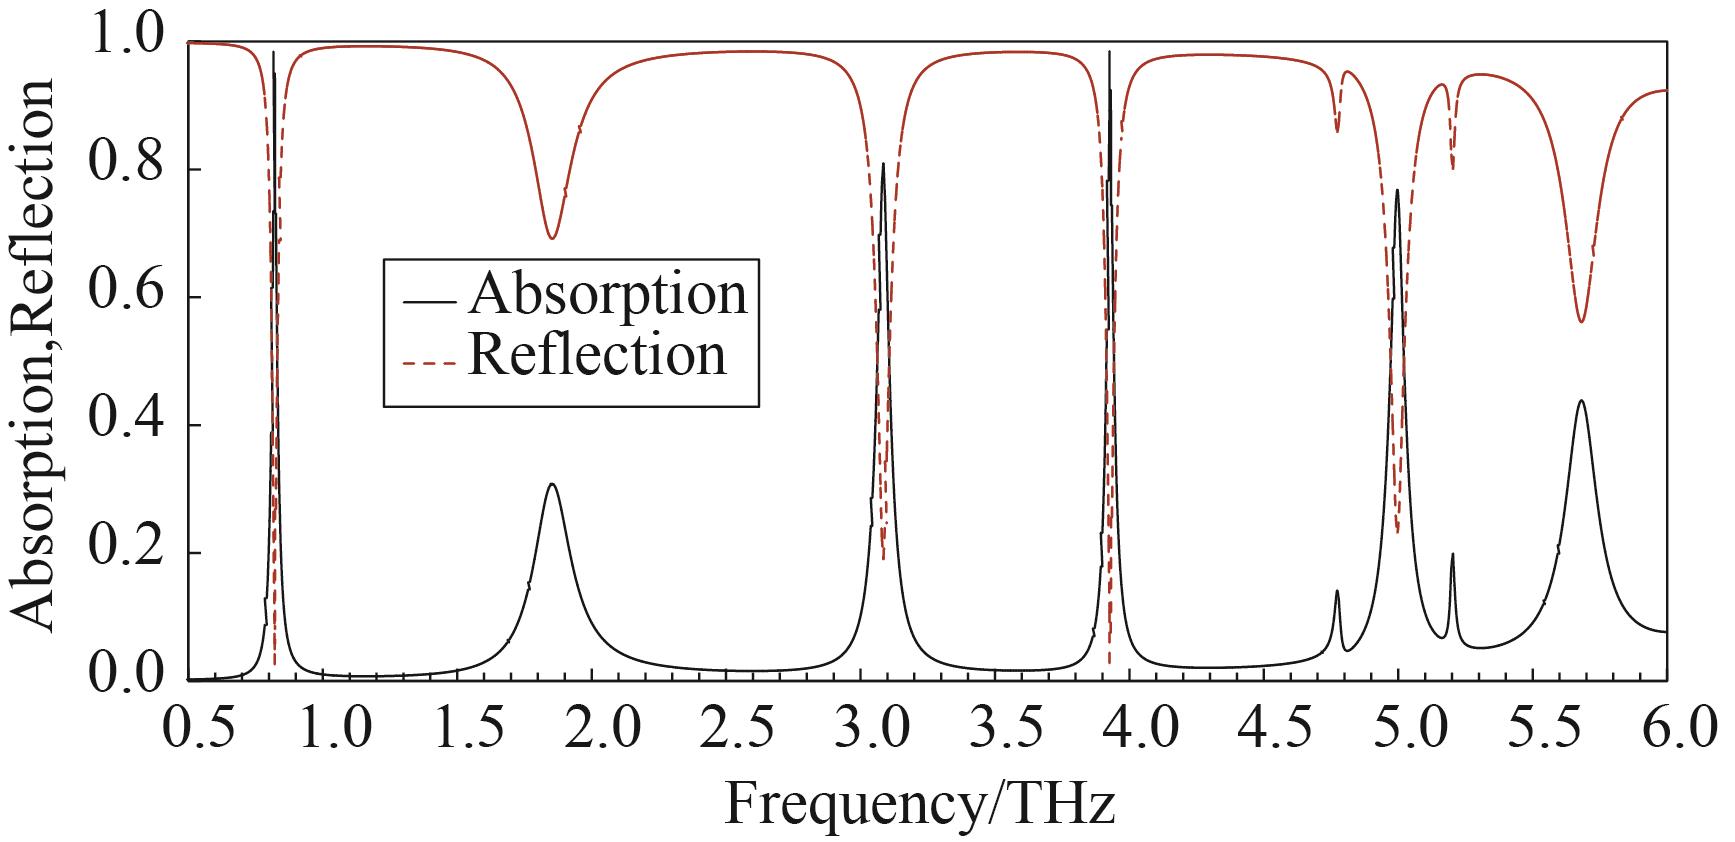 Reflection and absorption spectra of terahertz metamaterial absorbers without illumination